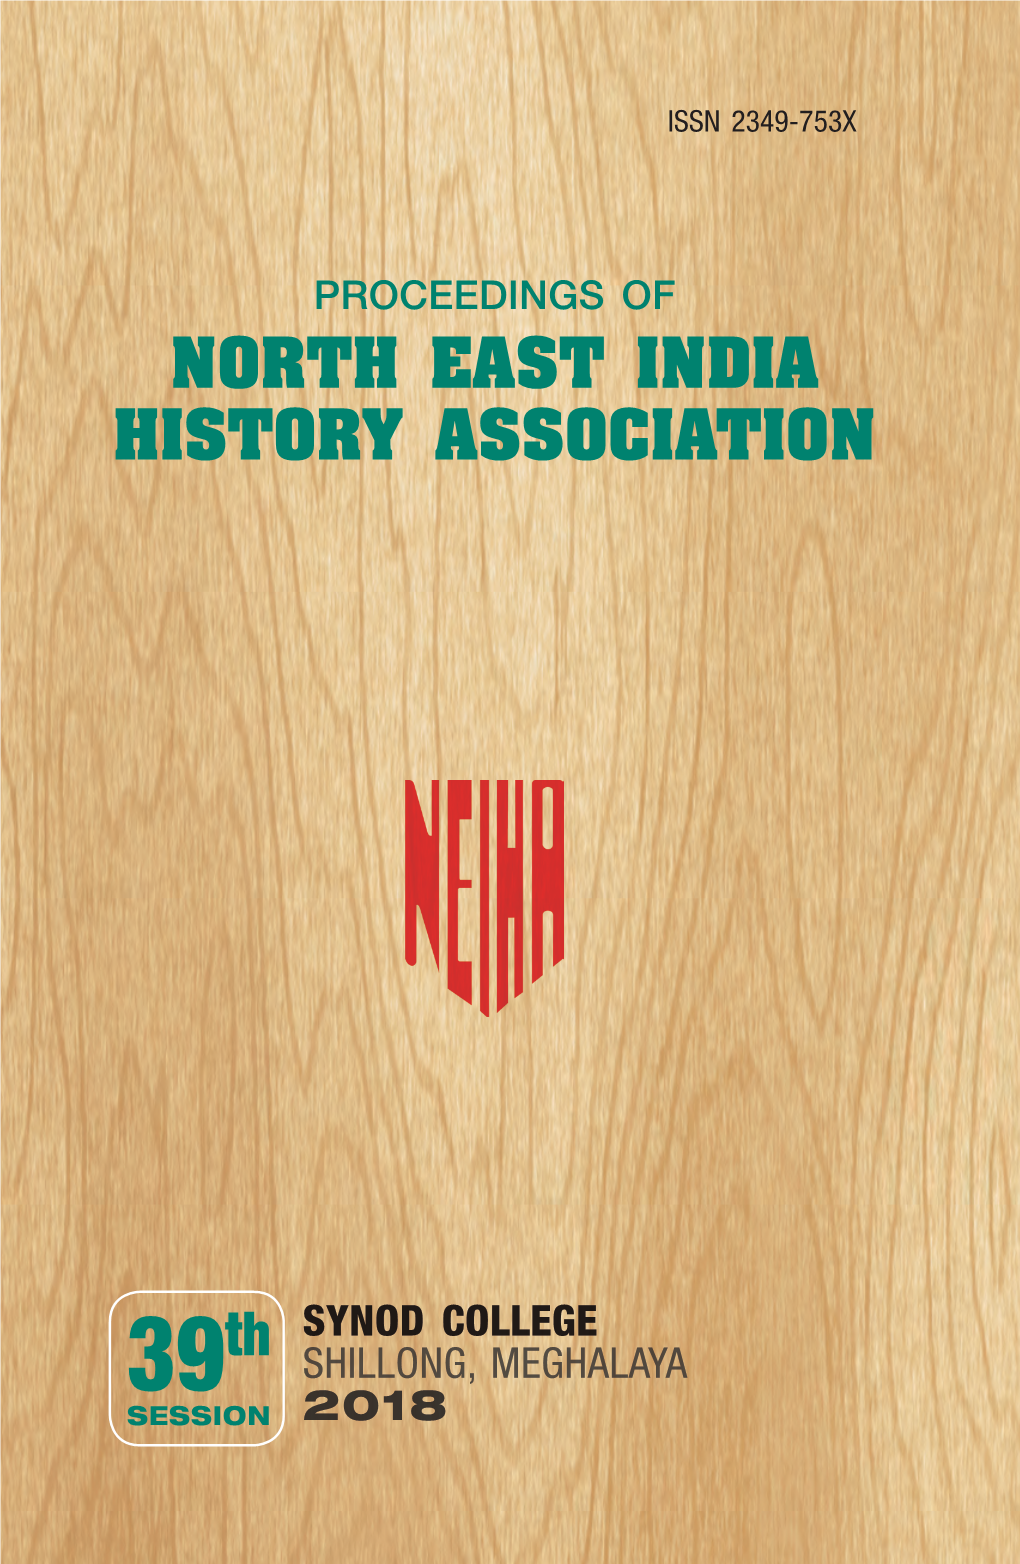 NORTH EAST INDIA HISTORY ASSOCIATION Session No